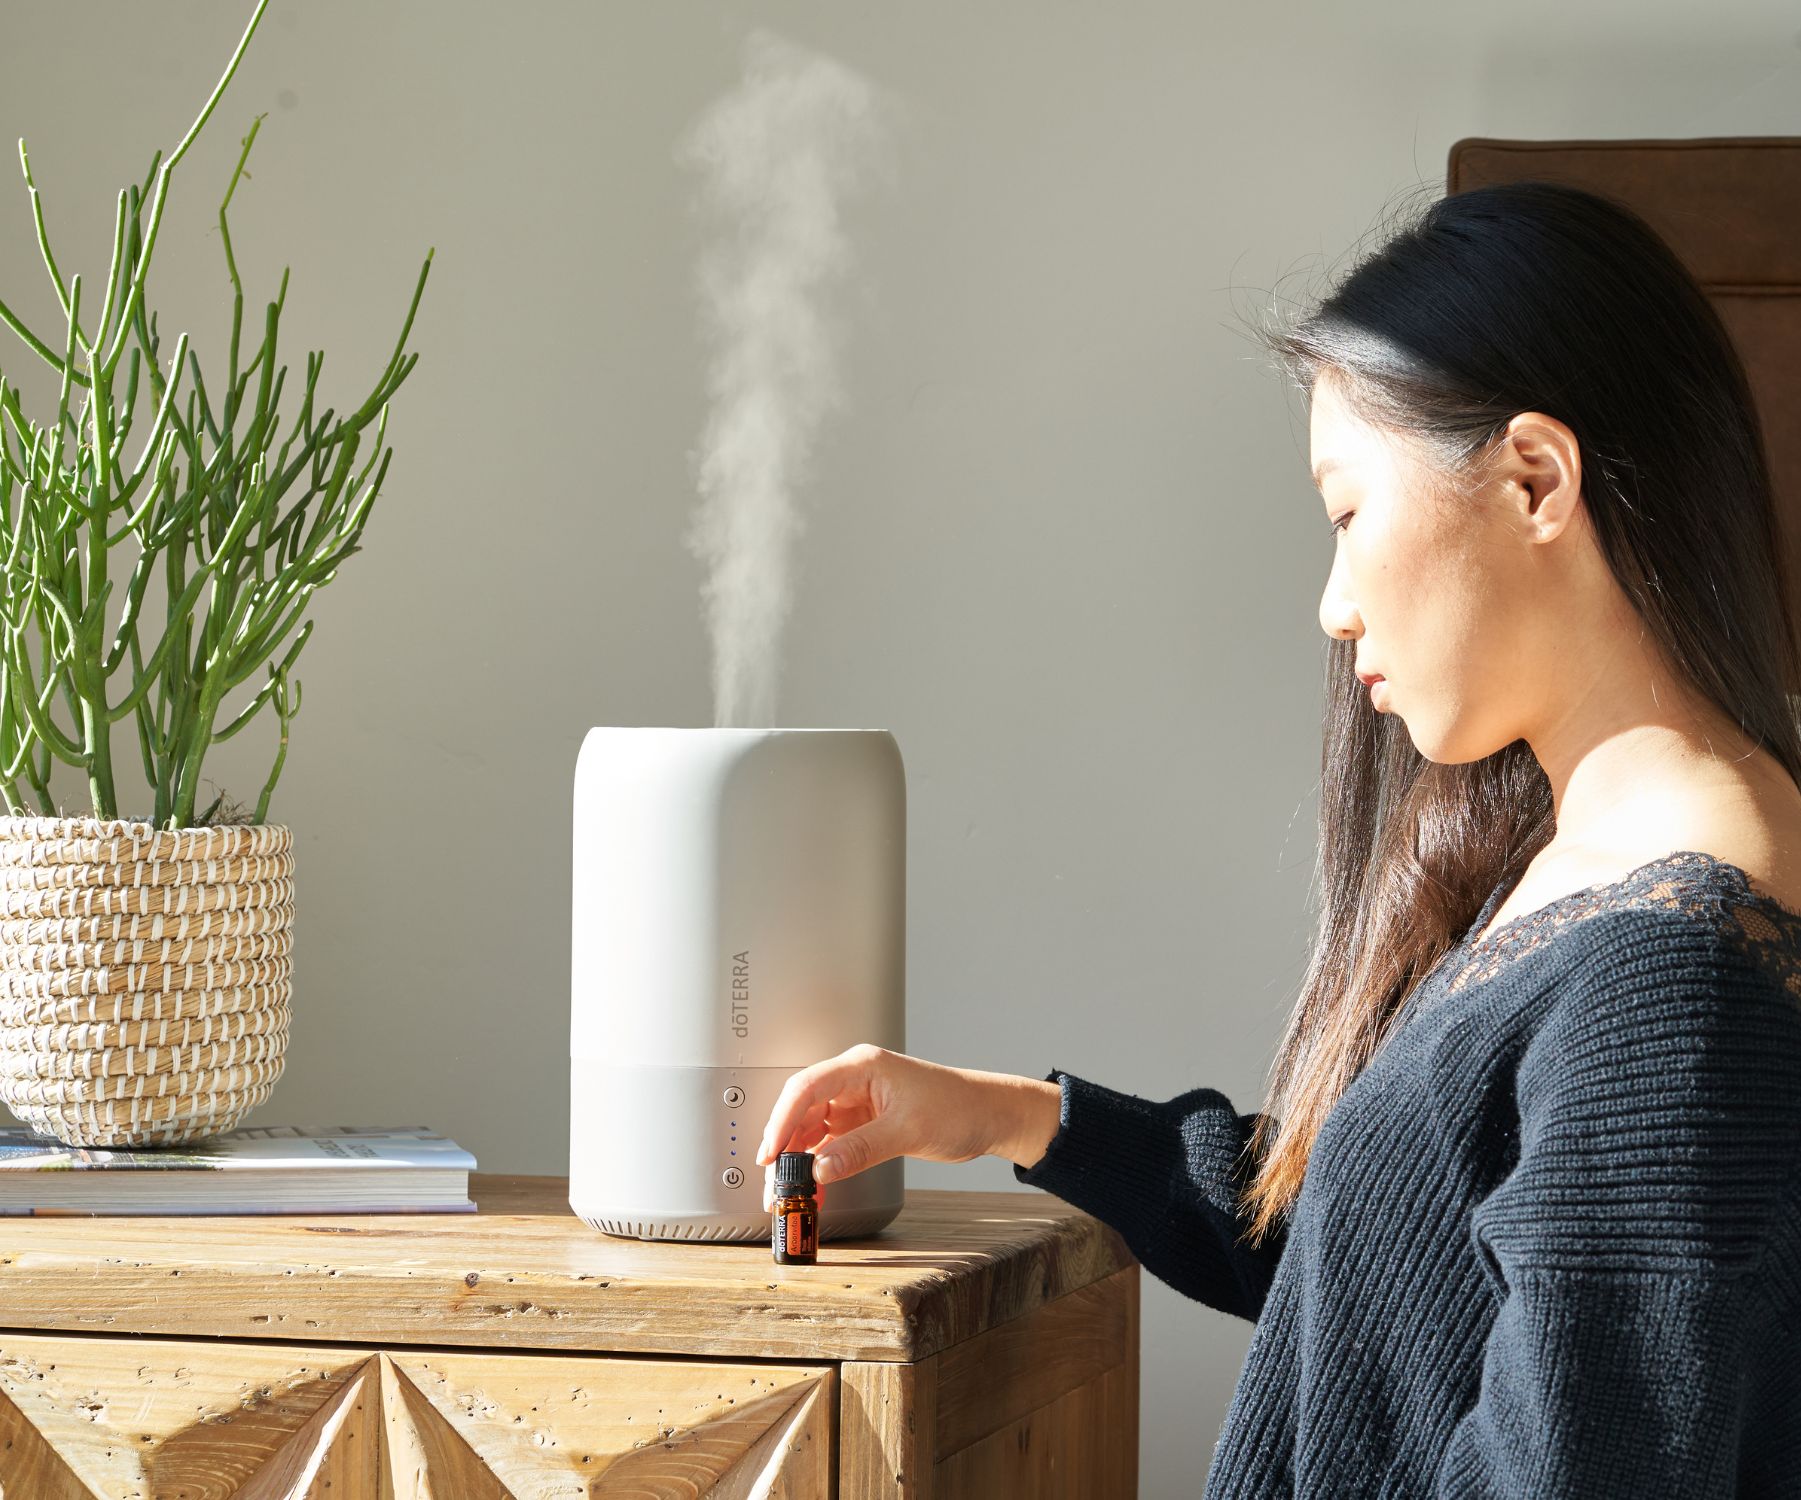 Do Humidifiers Help With Congestion?